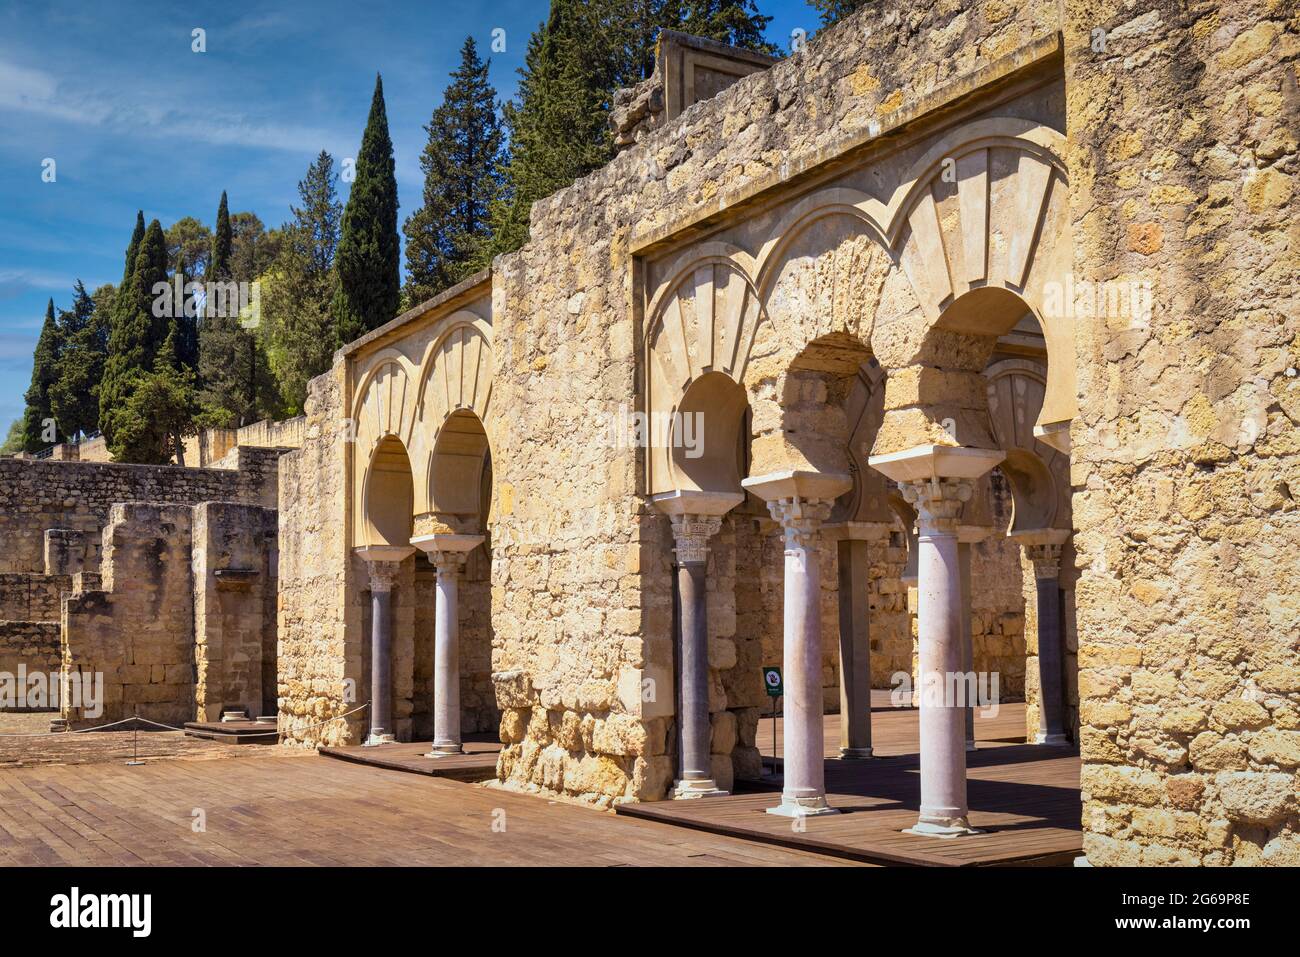 Upper Basilical Hall in the administrative area of the 10th century fortified palace and city of Medina Azahara, also known as Madinat al-Zahra, Cordo Stock Photo